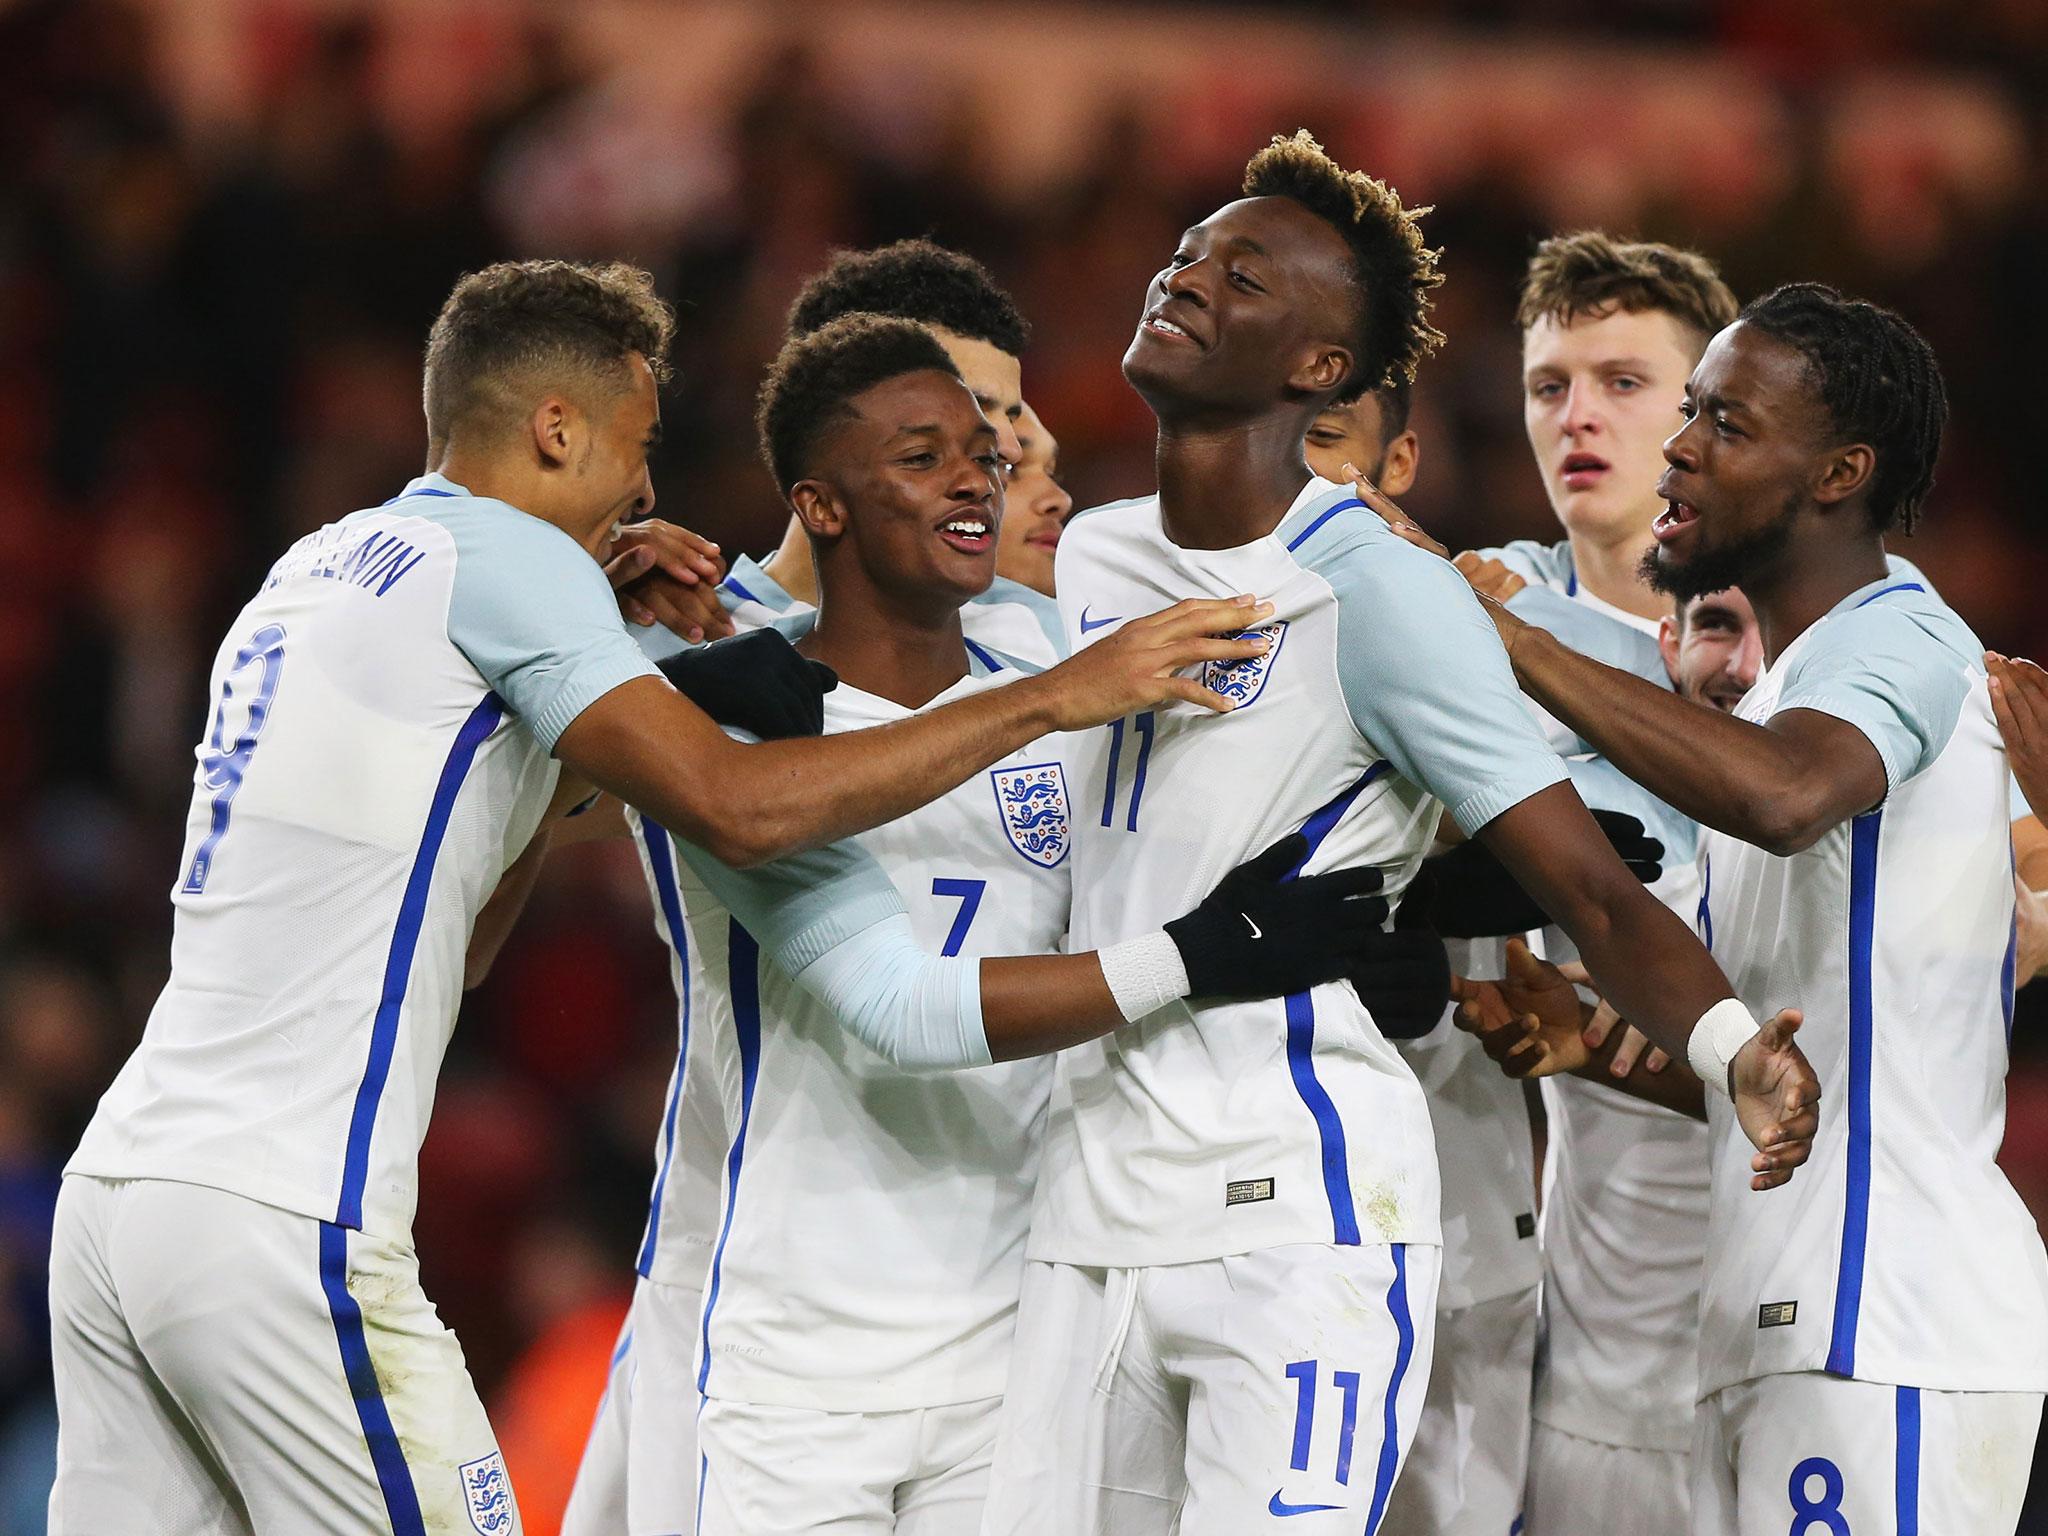 England's youngsters strike a very different style to the senior side